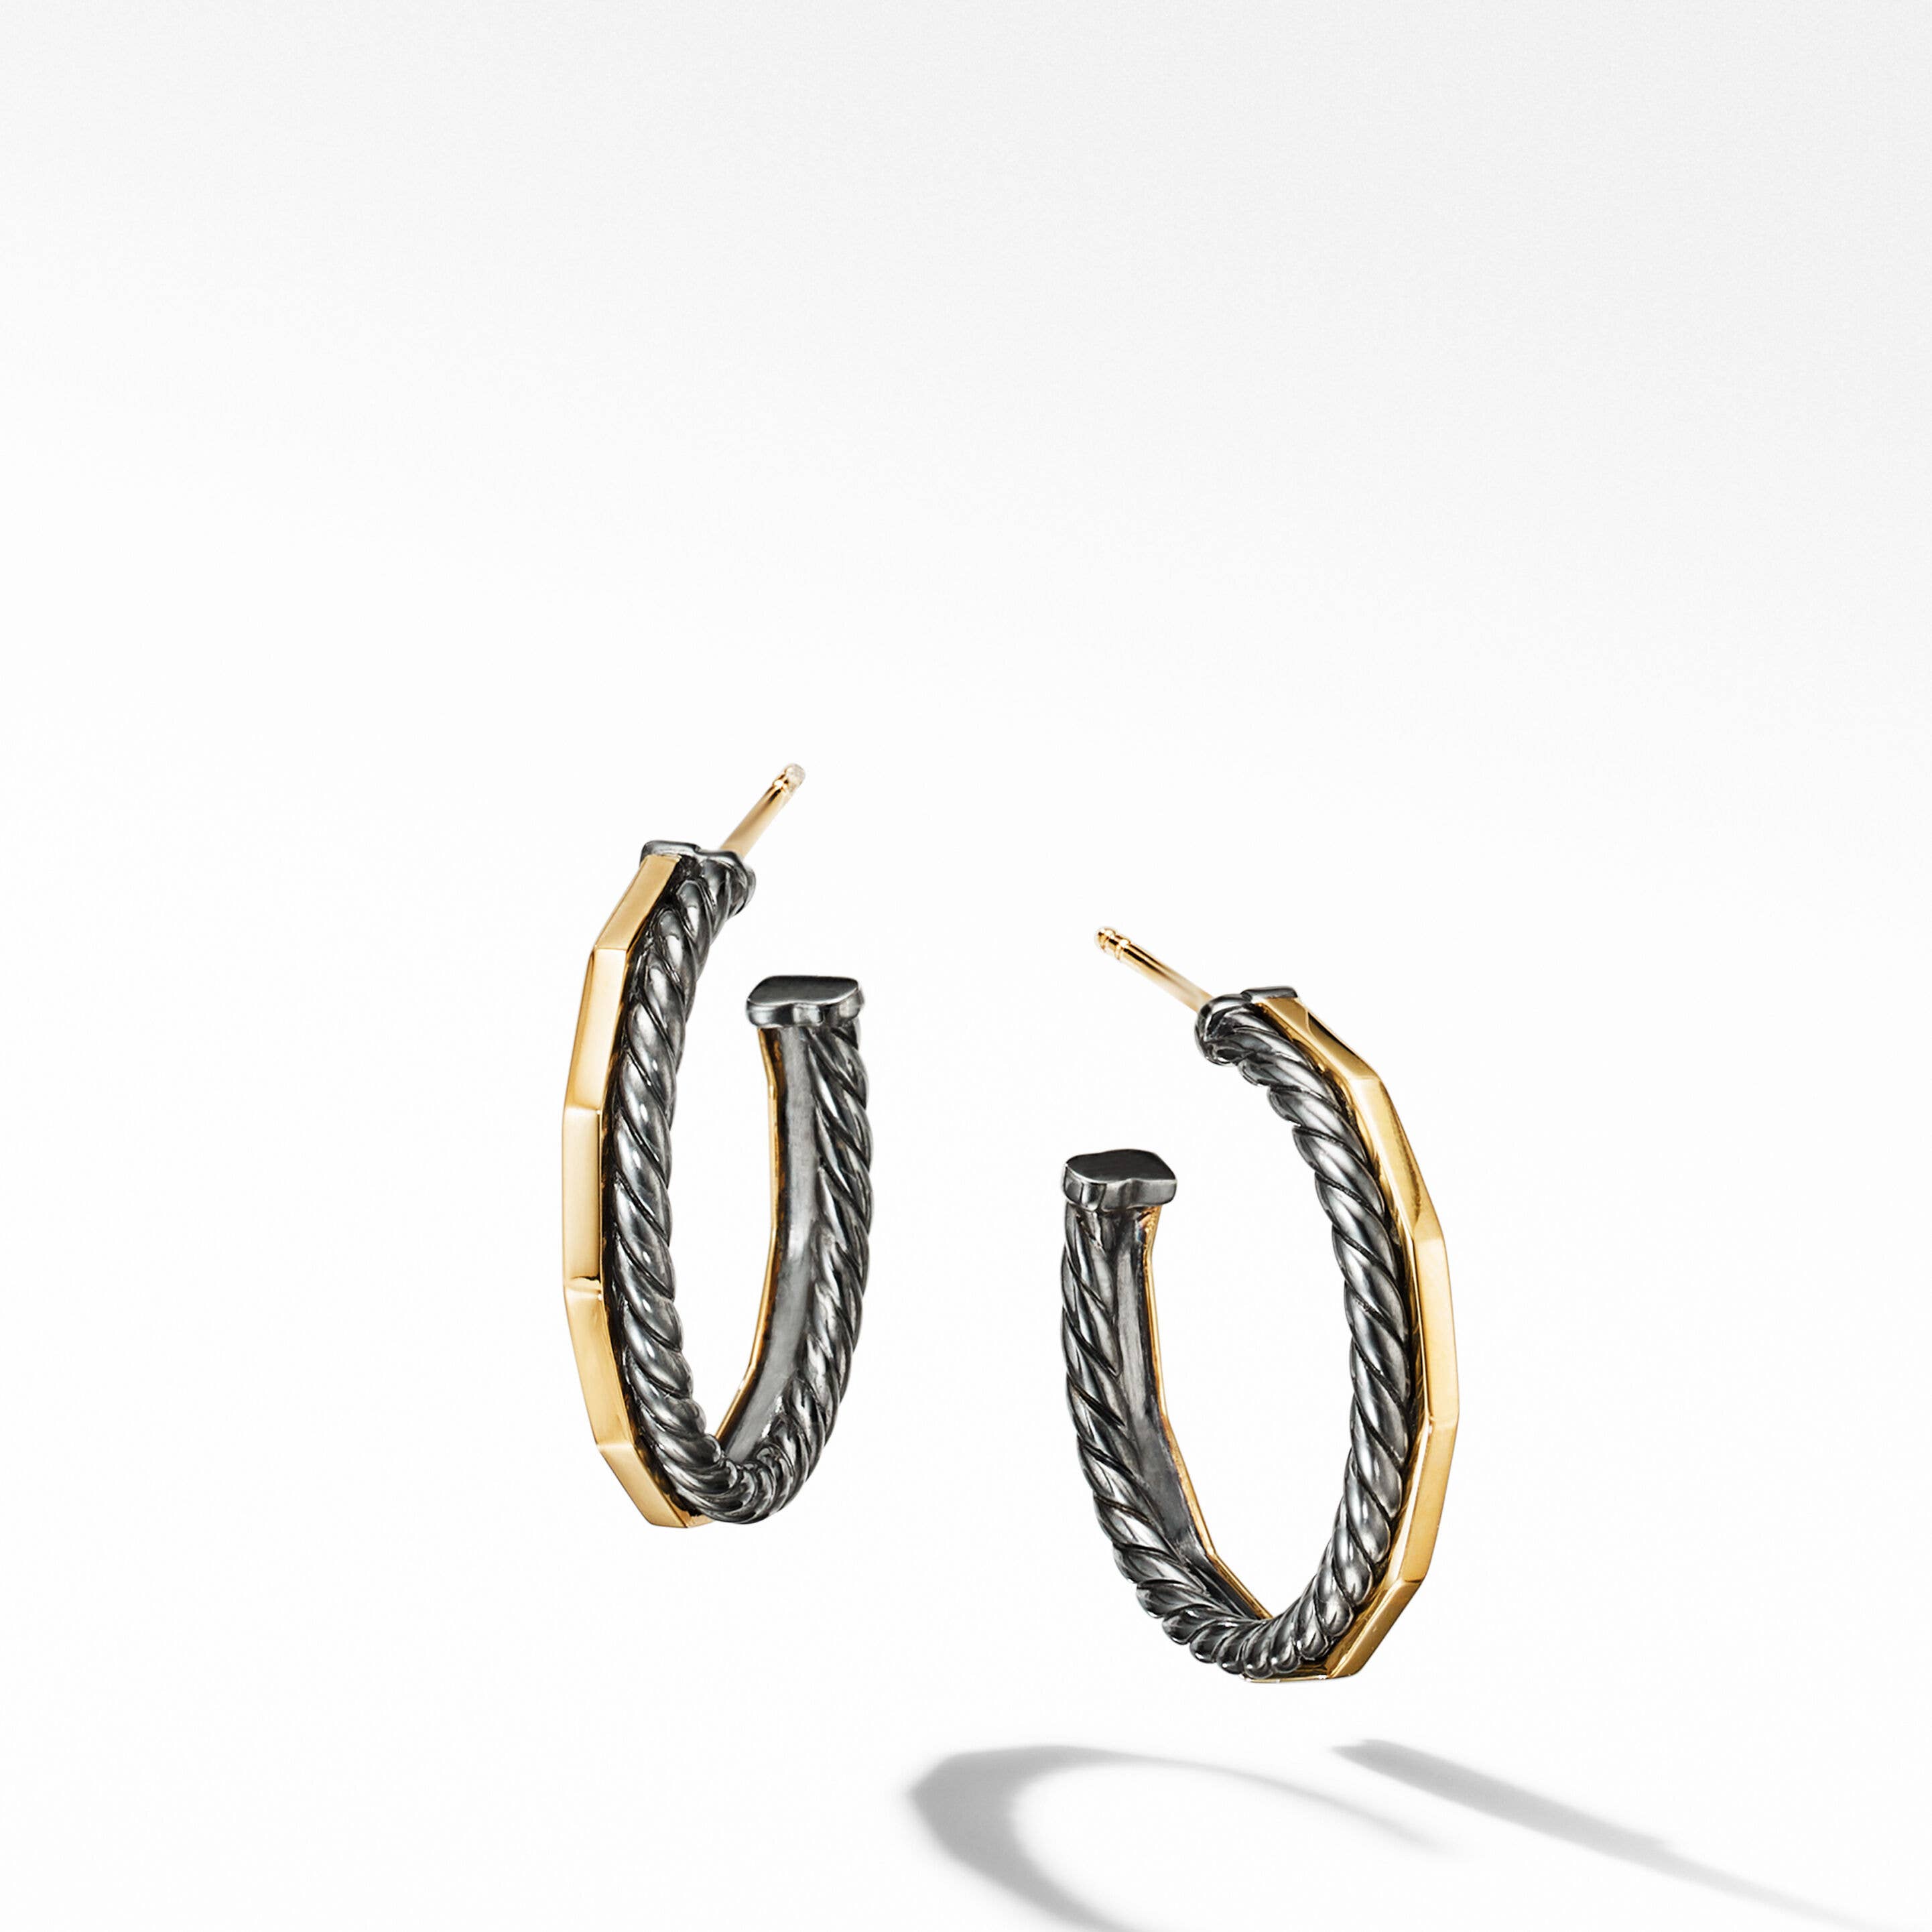 Stax Hoop Earrings in Blackened Silver with 18K Yellow Gold